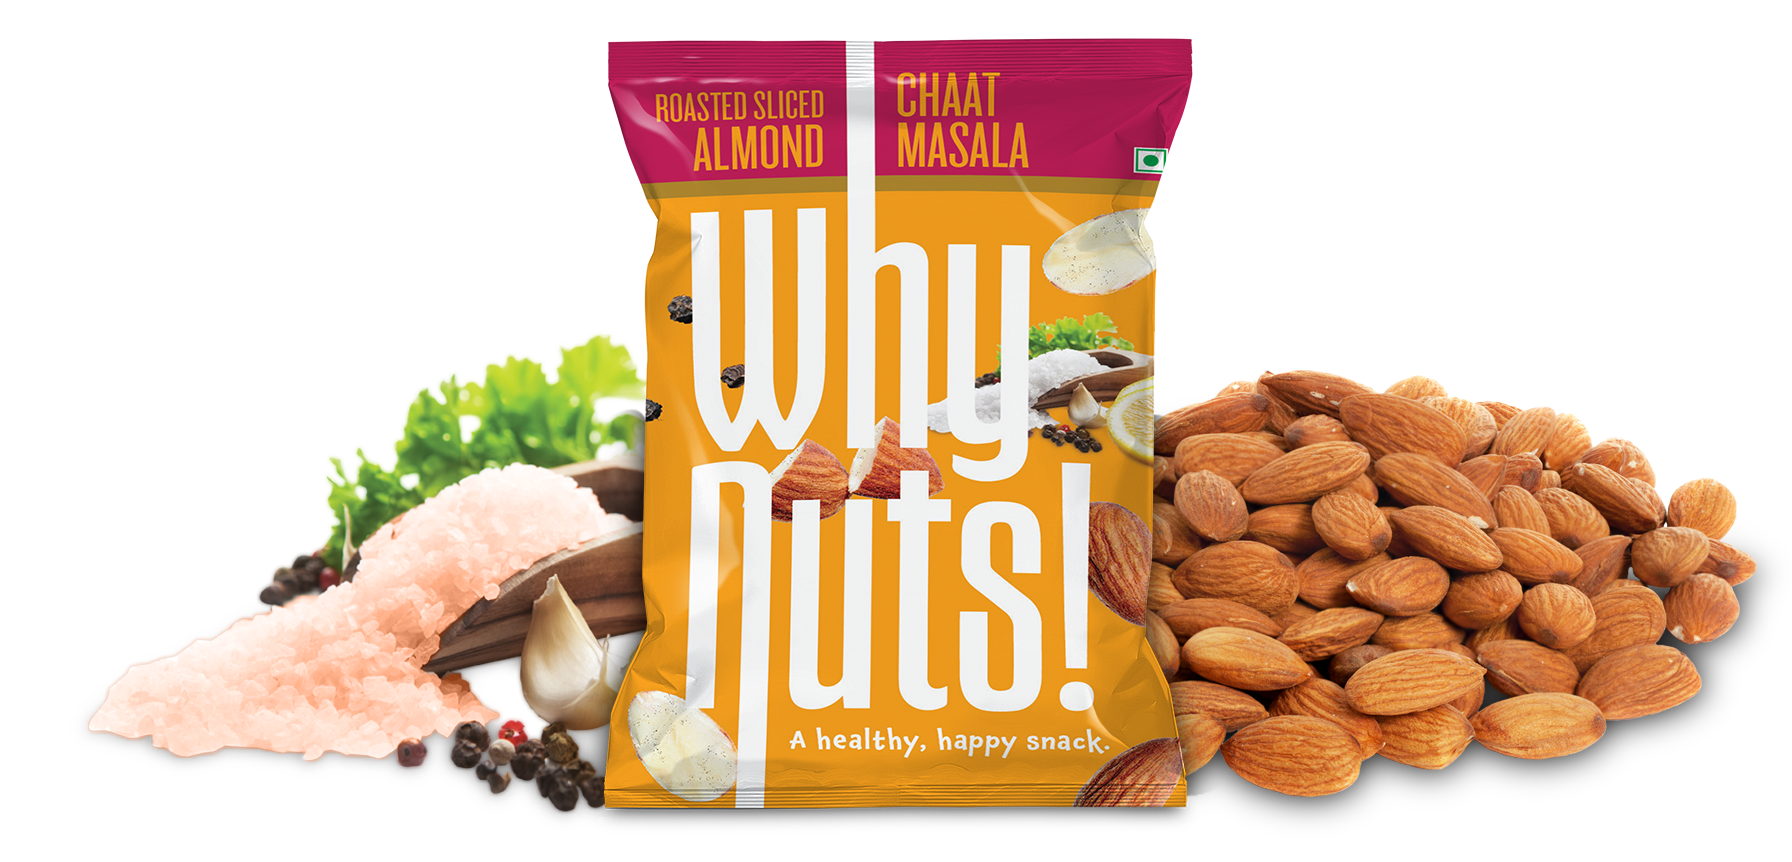  Roasted Sliced Almonds Chat Masala